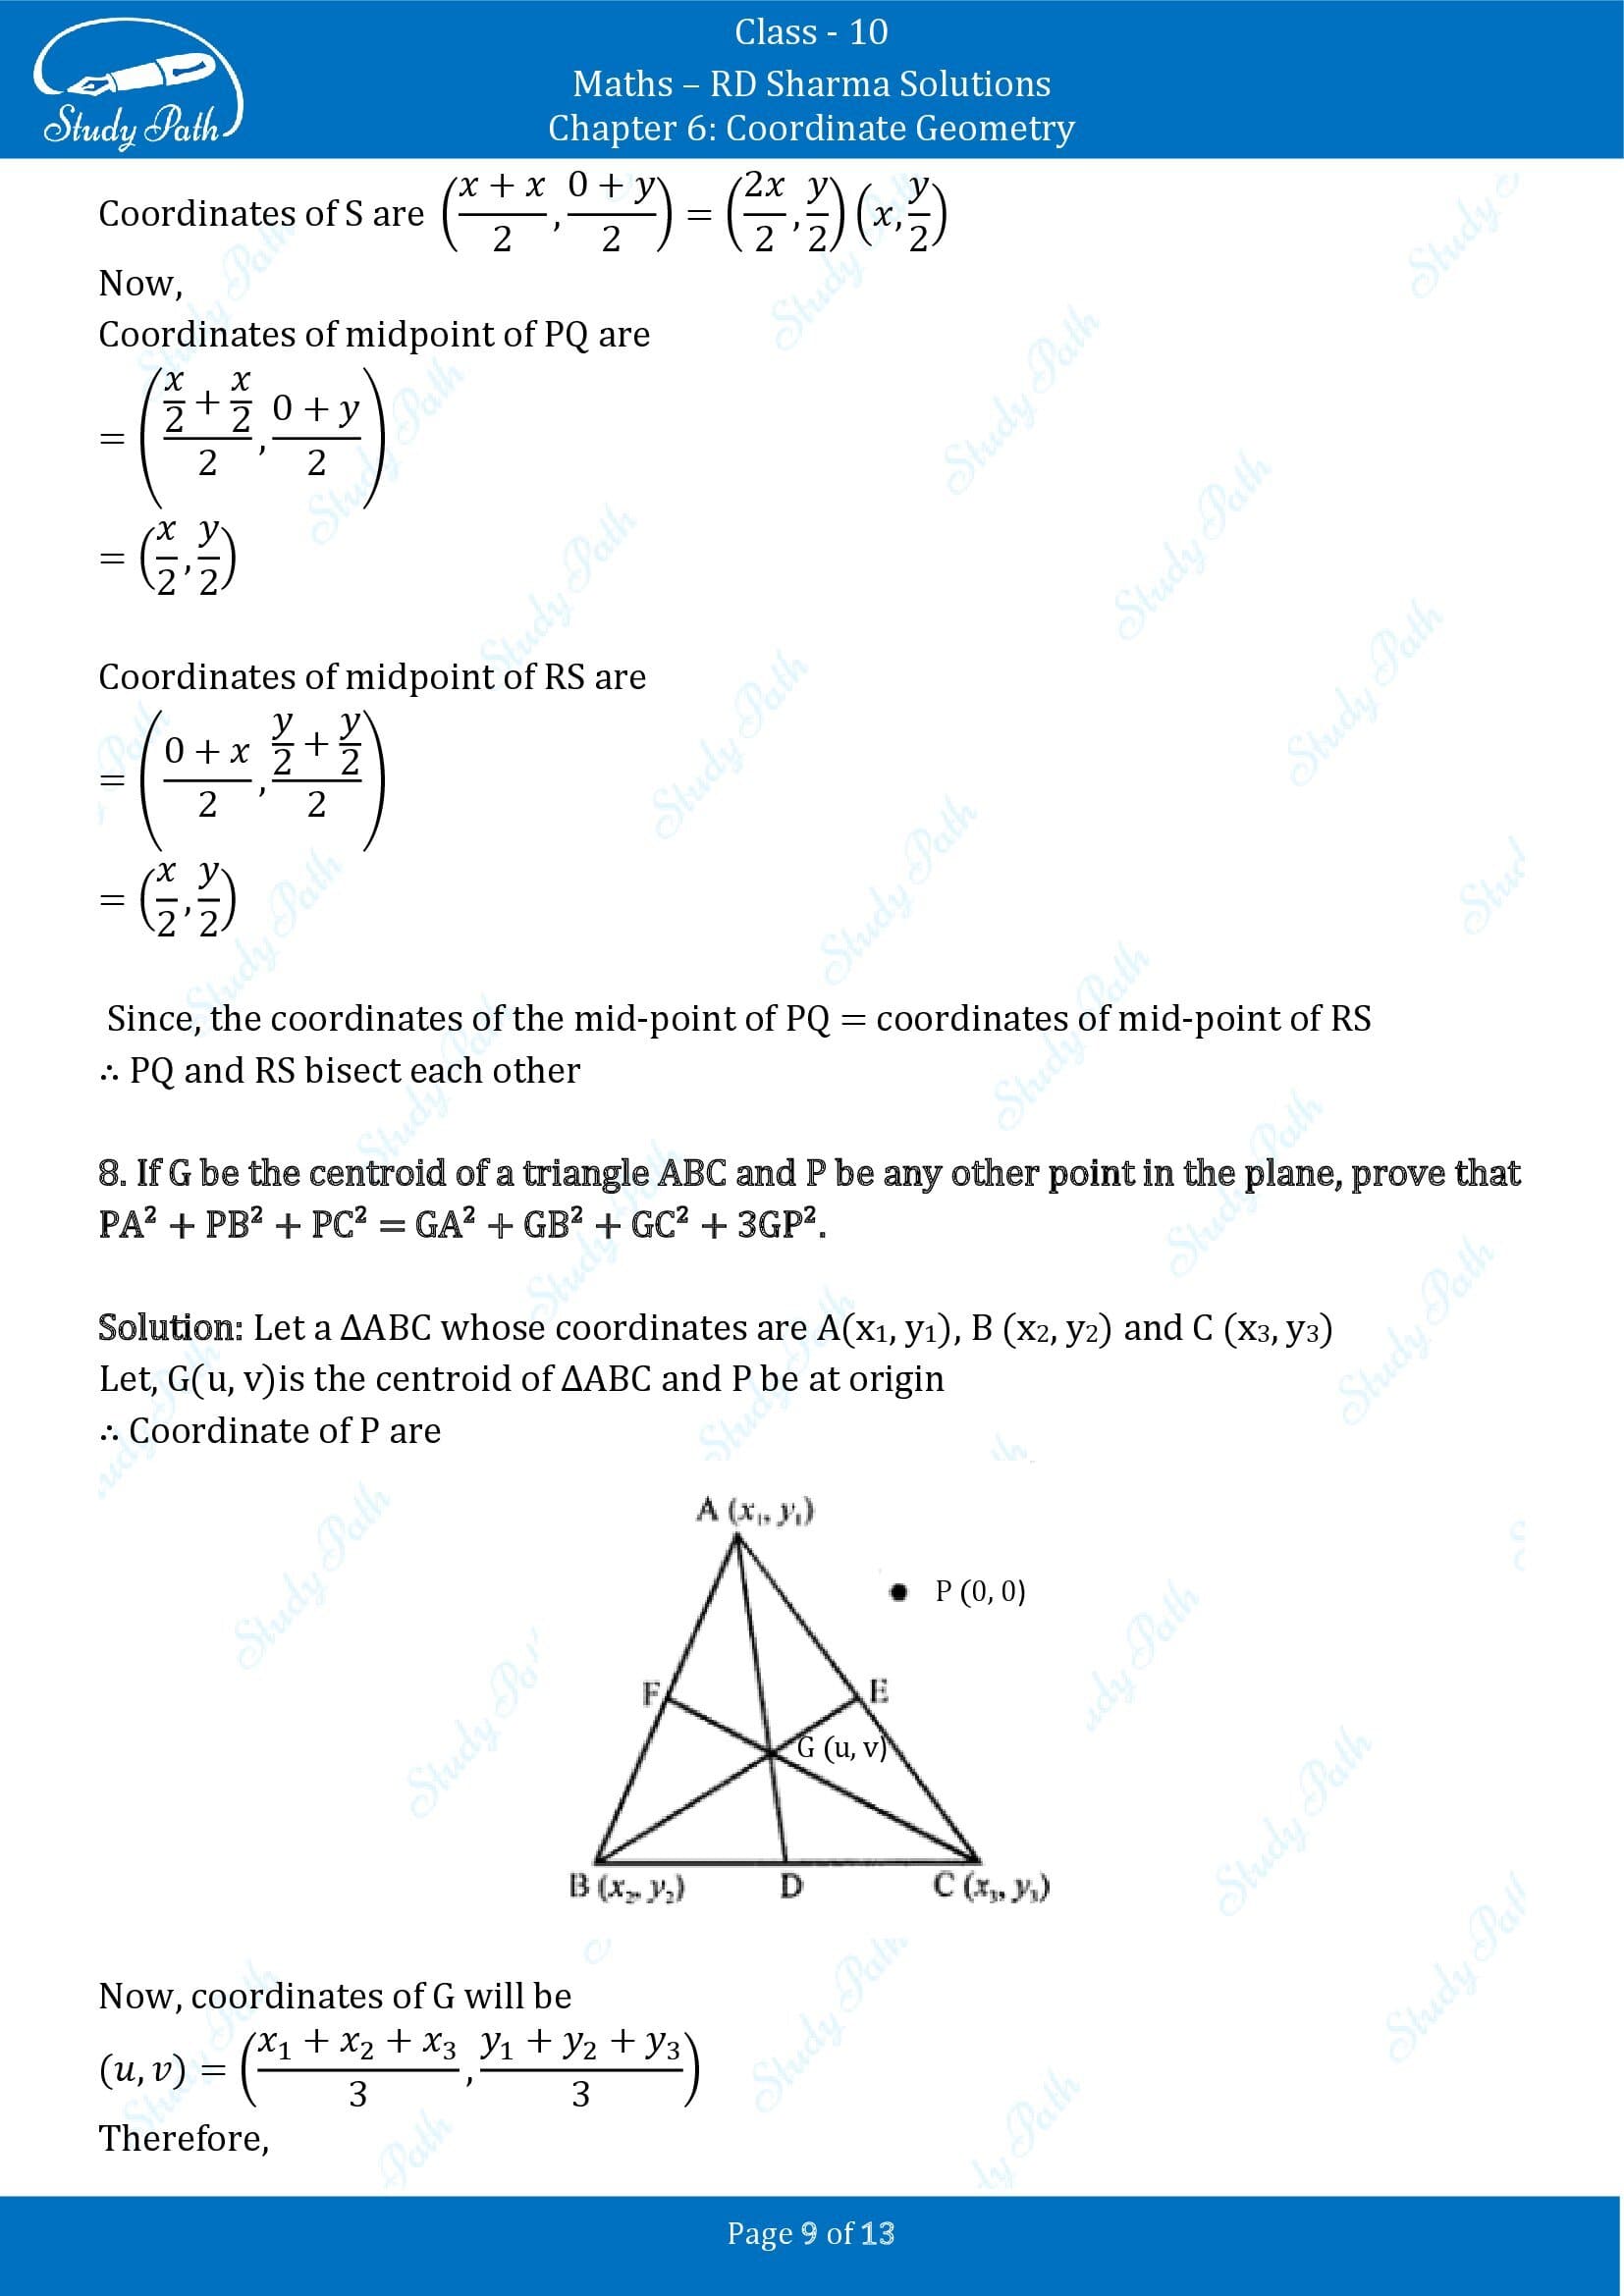 RD Sharma Solutions Class 10 Chapter 6 Coordinate Geometry Exercise 6.4 00009